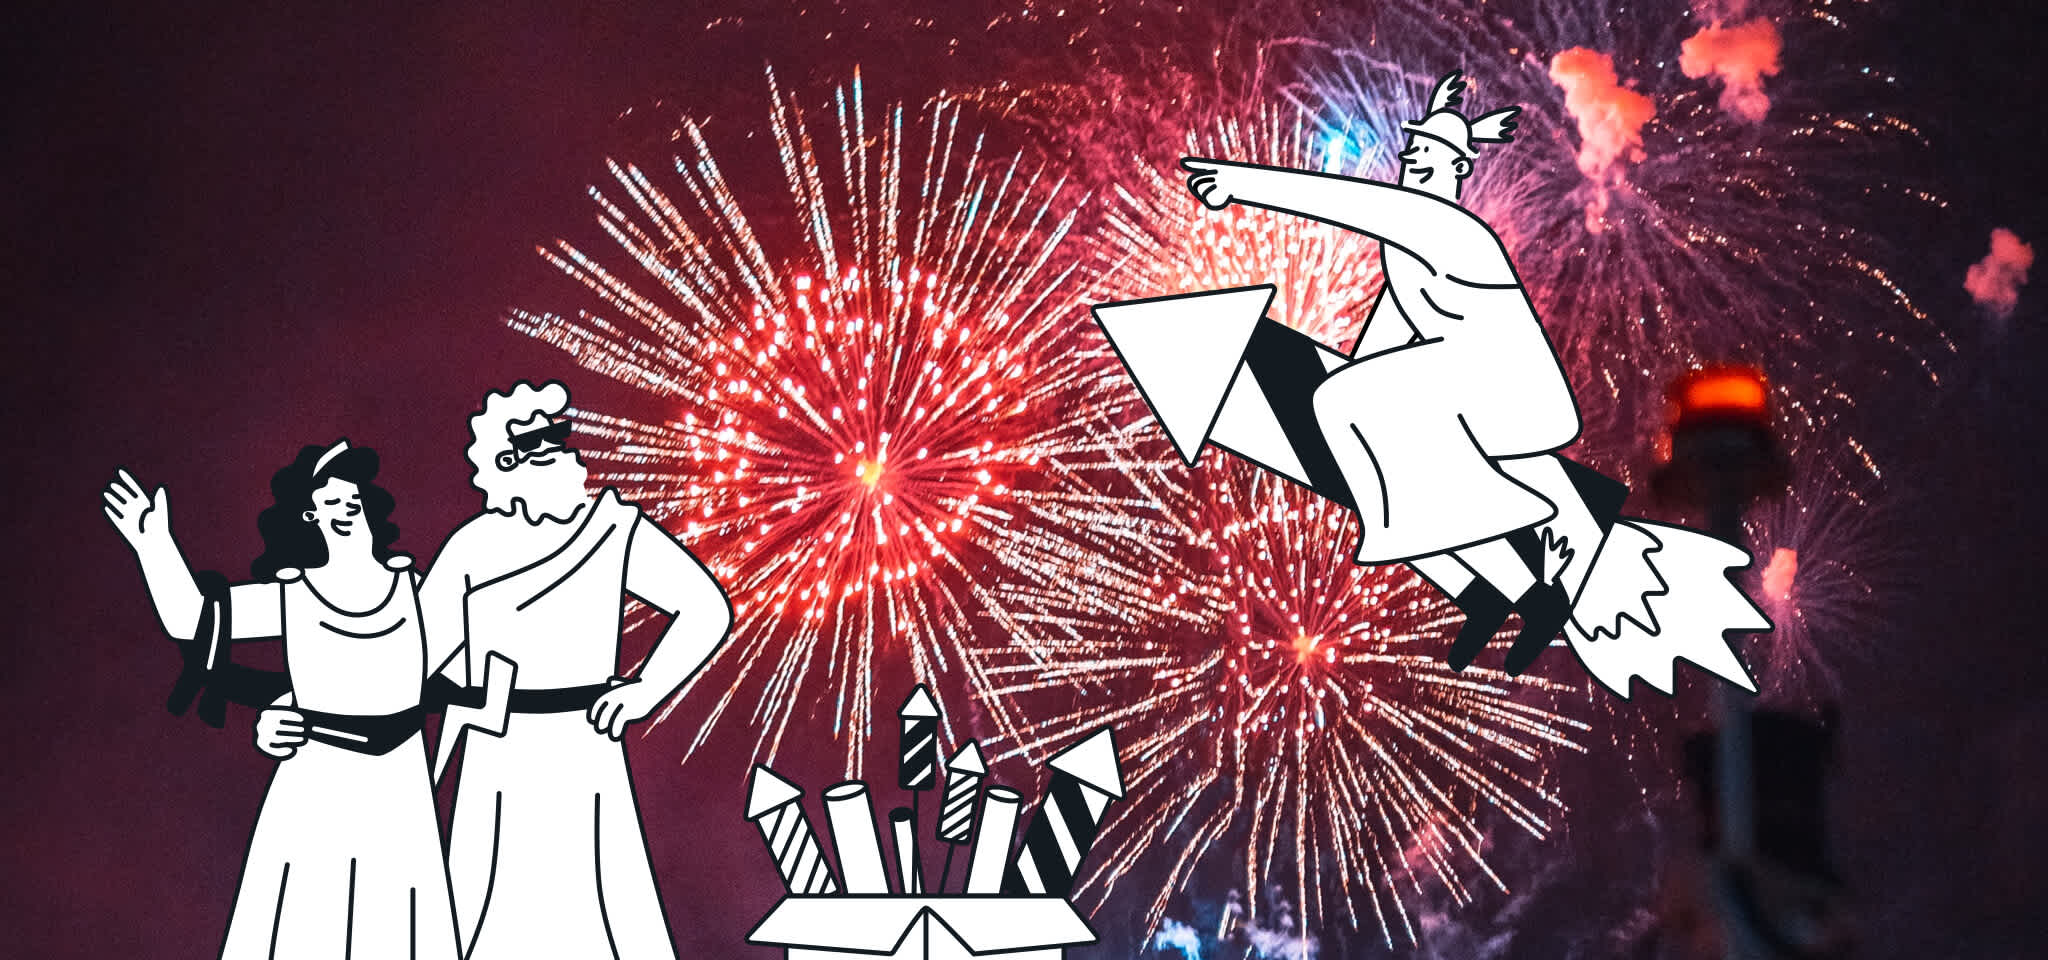 Hermes and two other Gods celebrate with fireworks